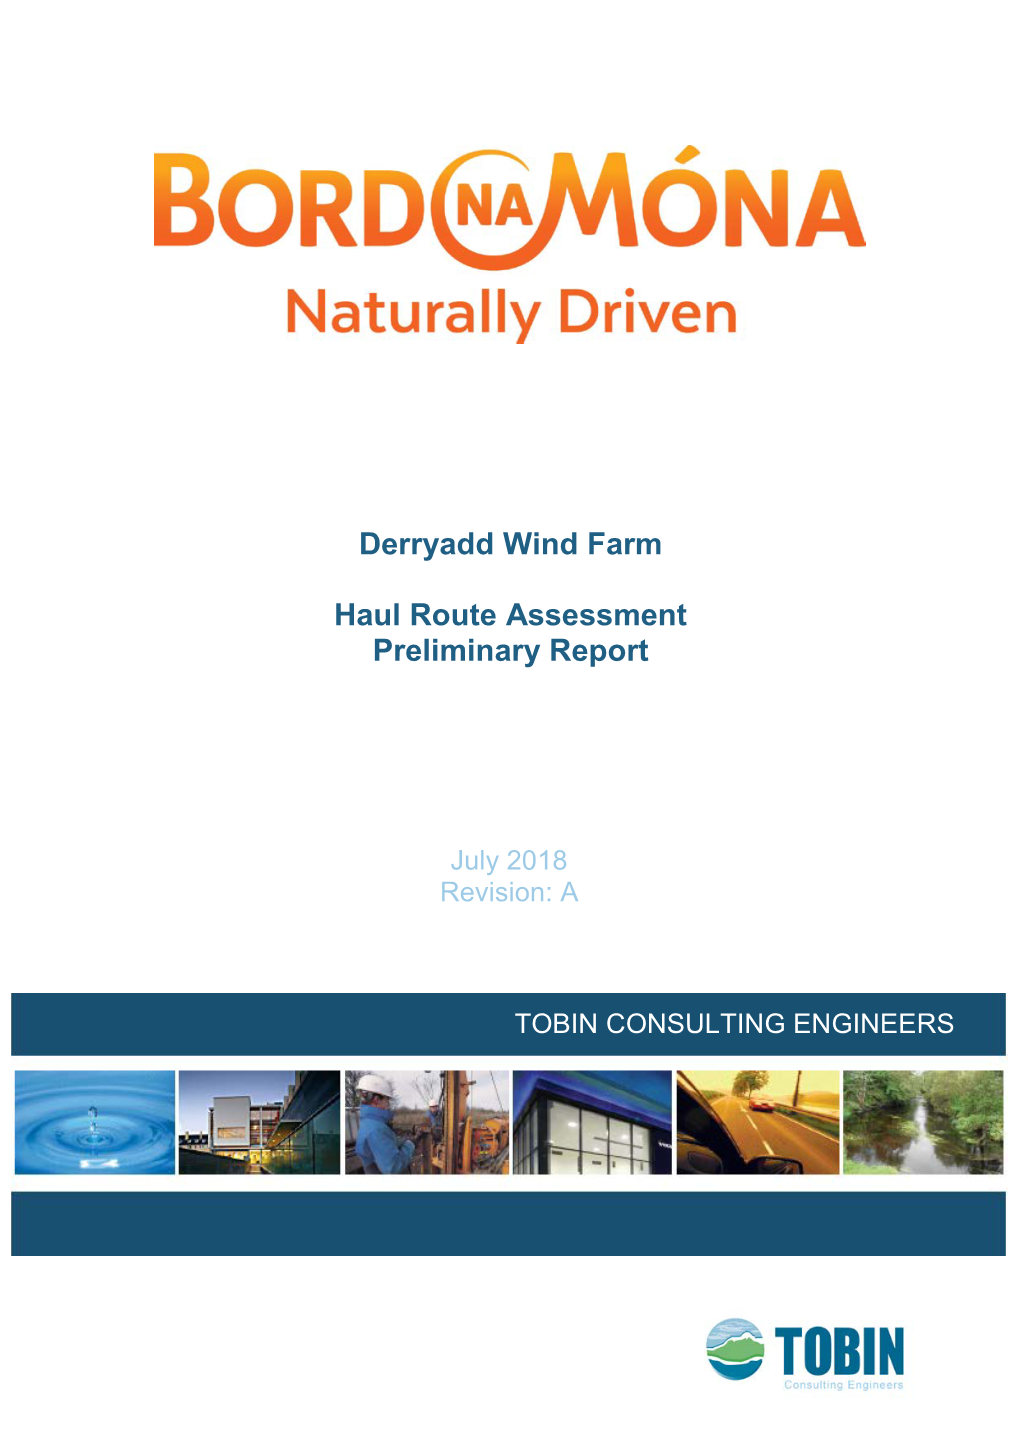 Derryadd Wind Farm Haul Route Assessment Preliminary Report